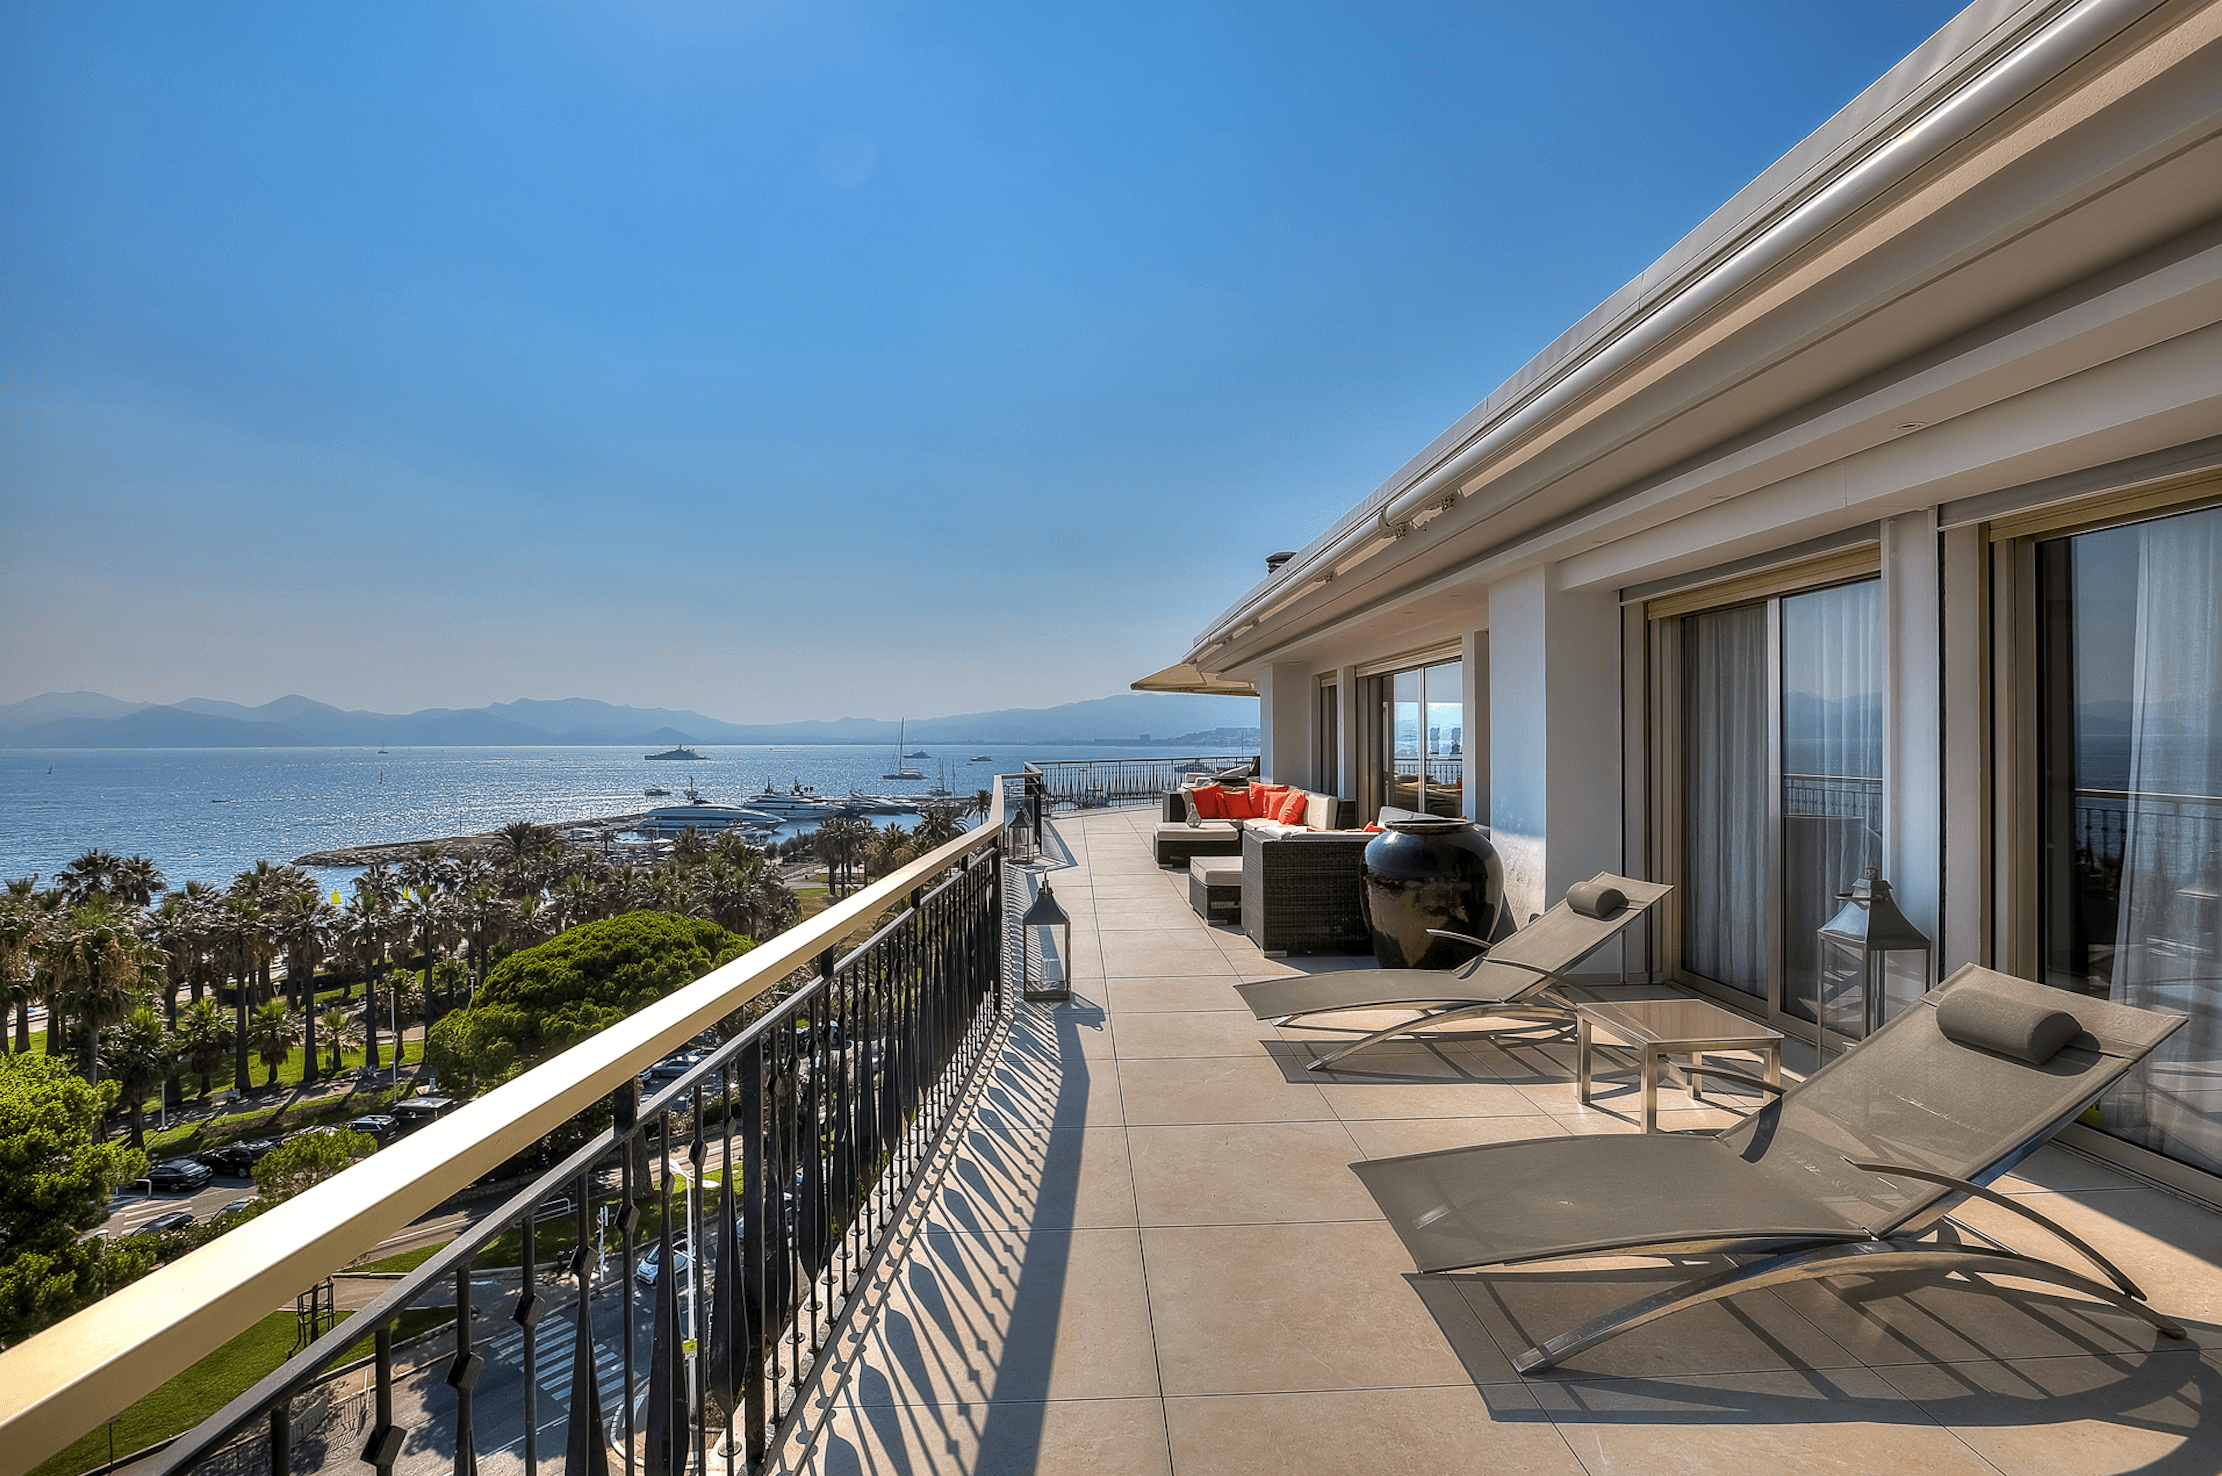 Cannes ,Splendid penthouse located on la croisette with sea view.